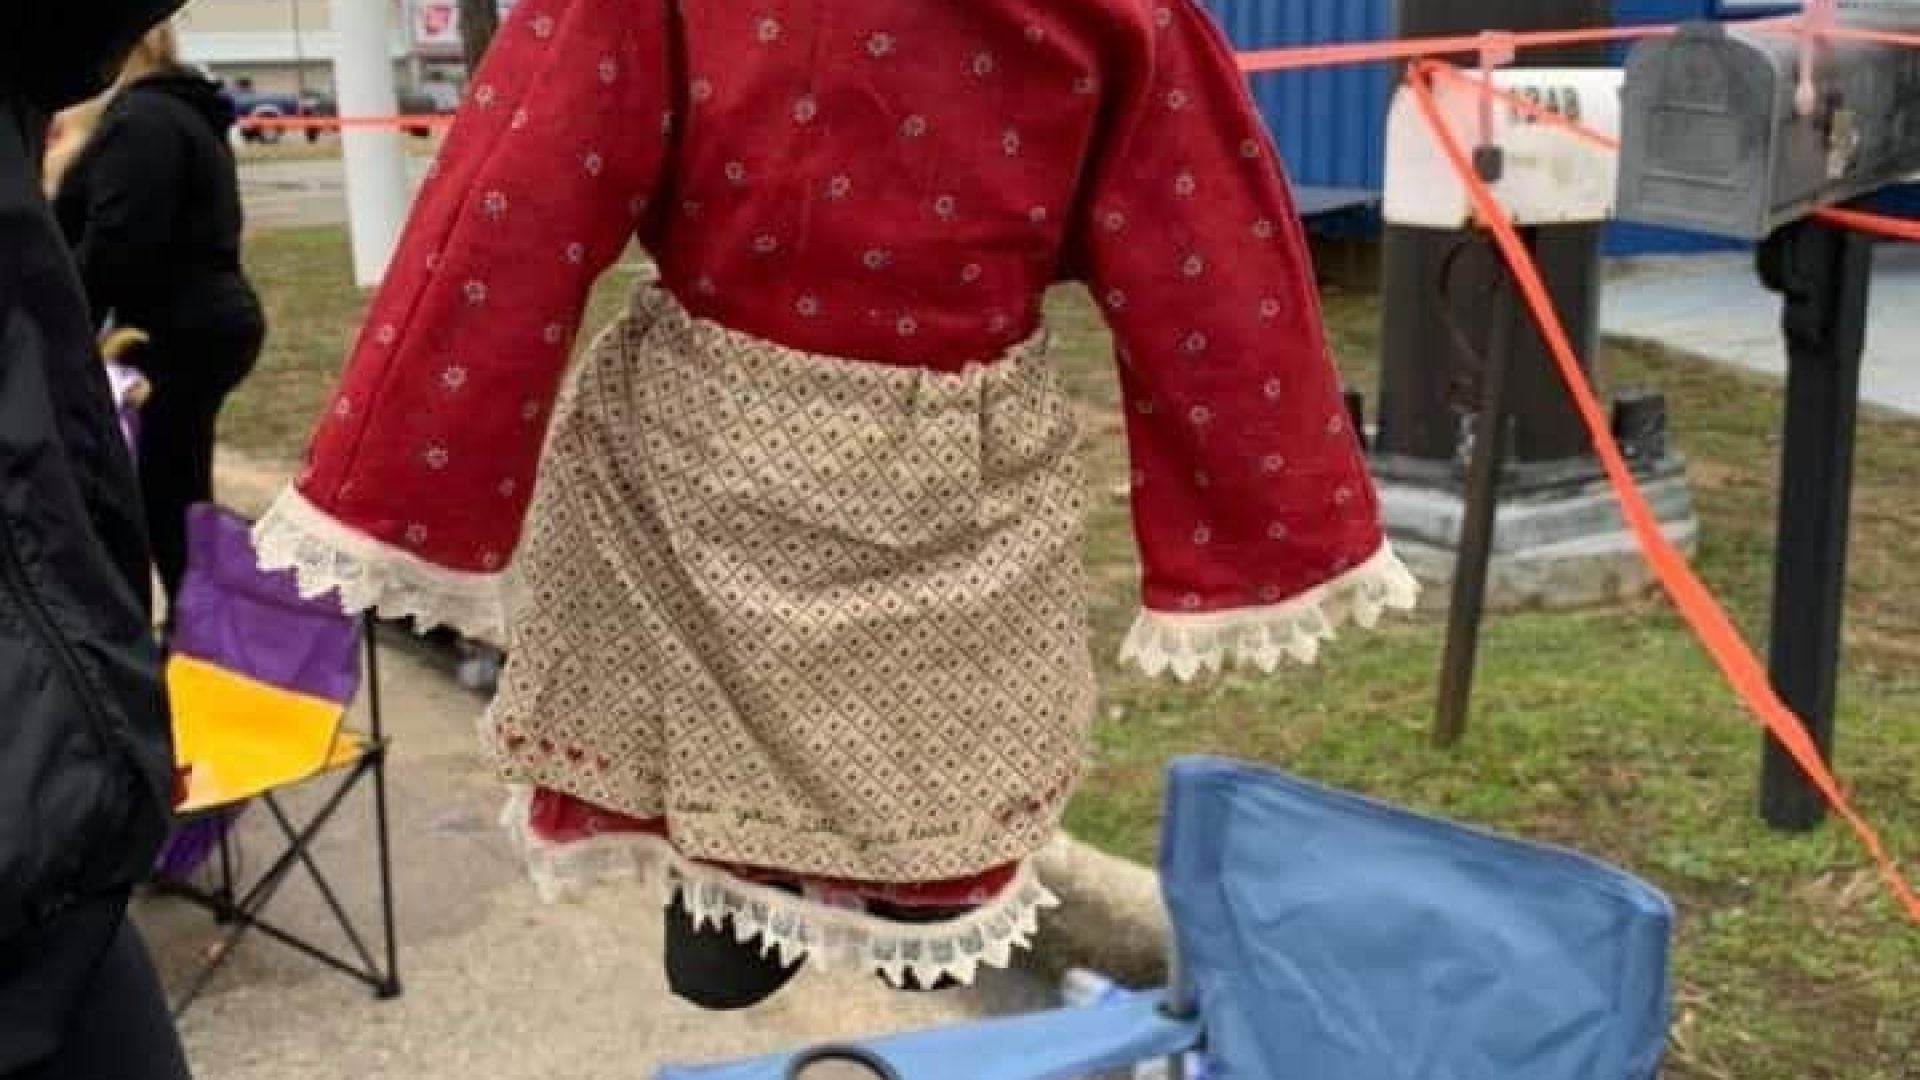 Black Doll Hanging From Noose Made Of Beads Given To Child During Mardi Gras Parade